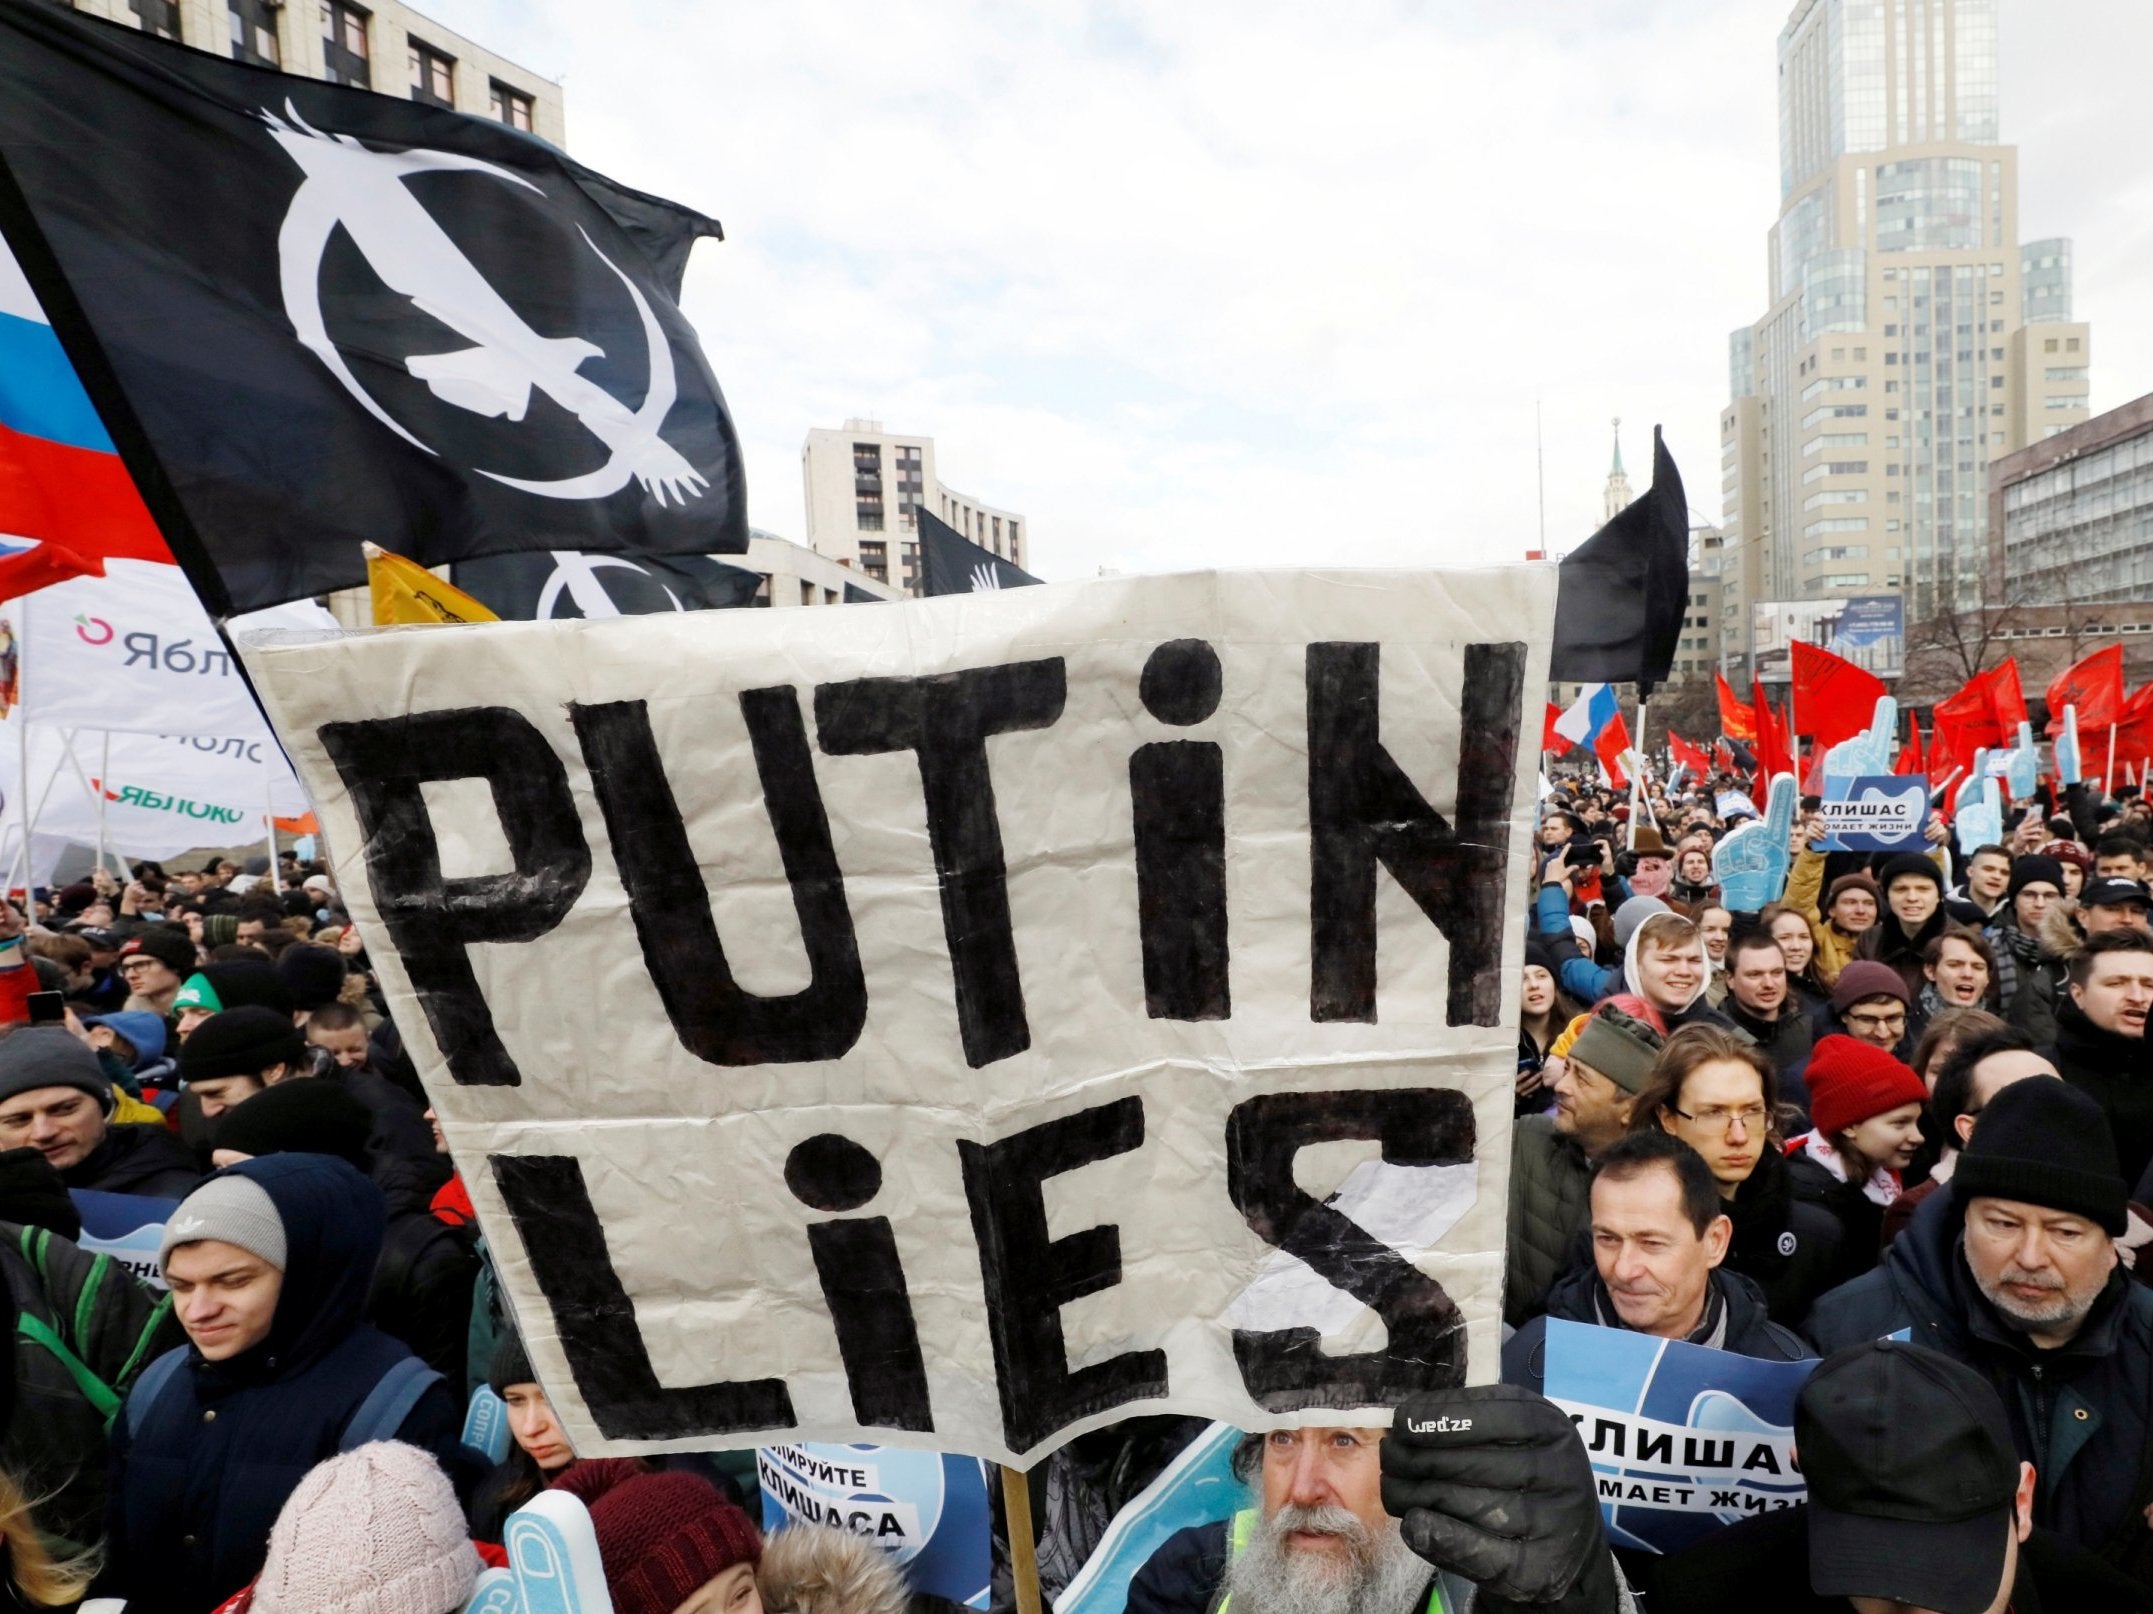 People attend a rally to protest against tightening state control over internet in Moscow